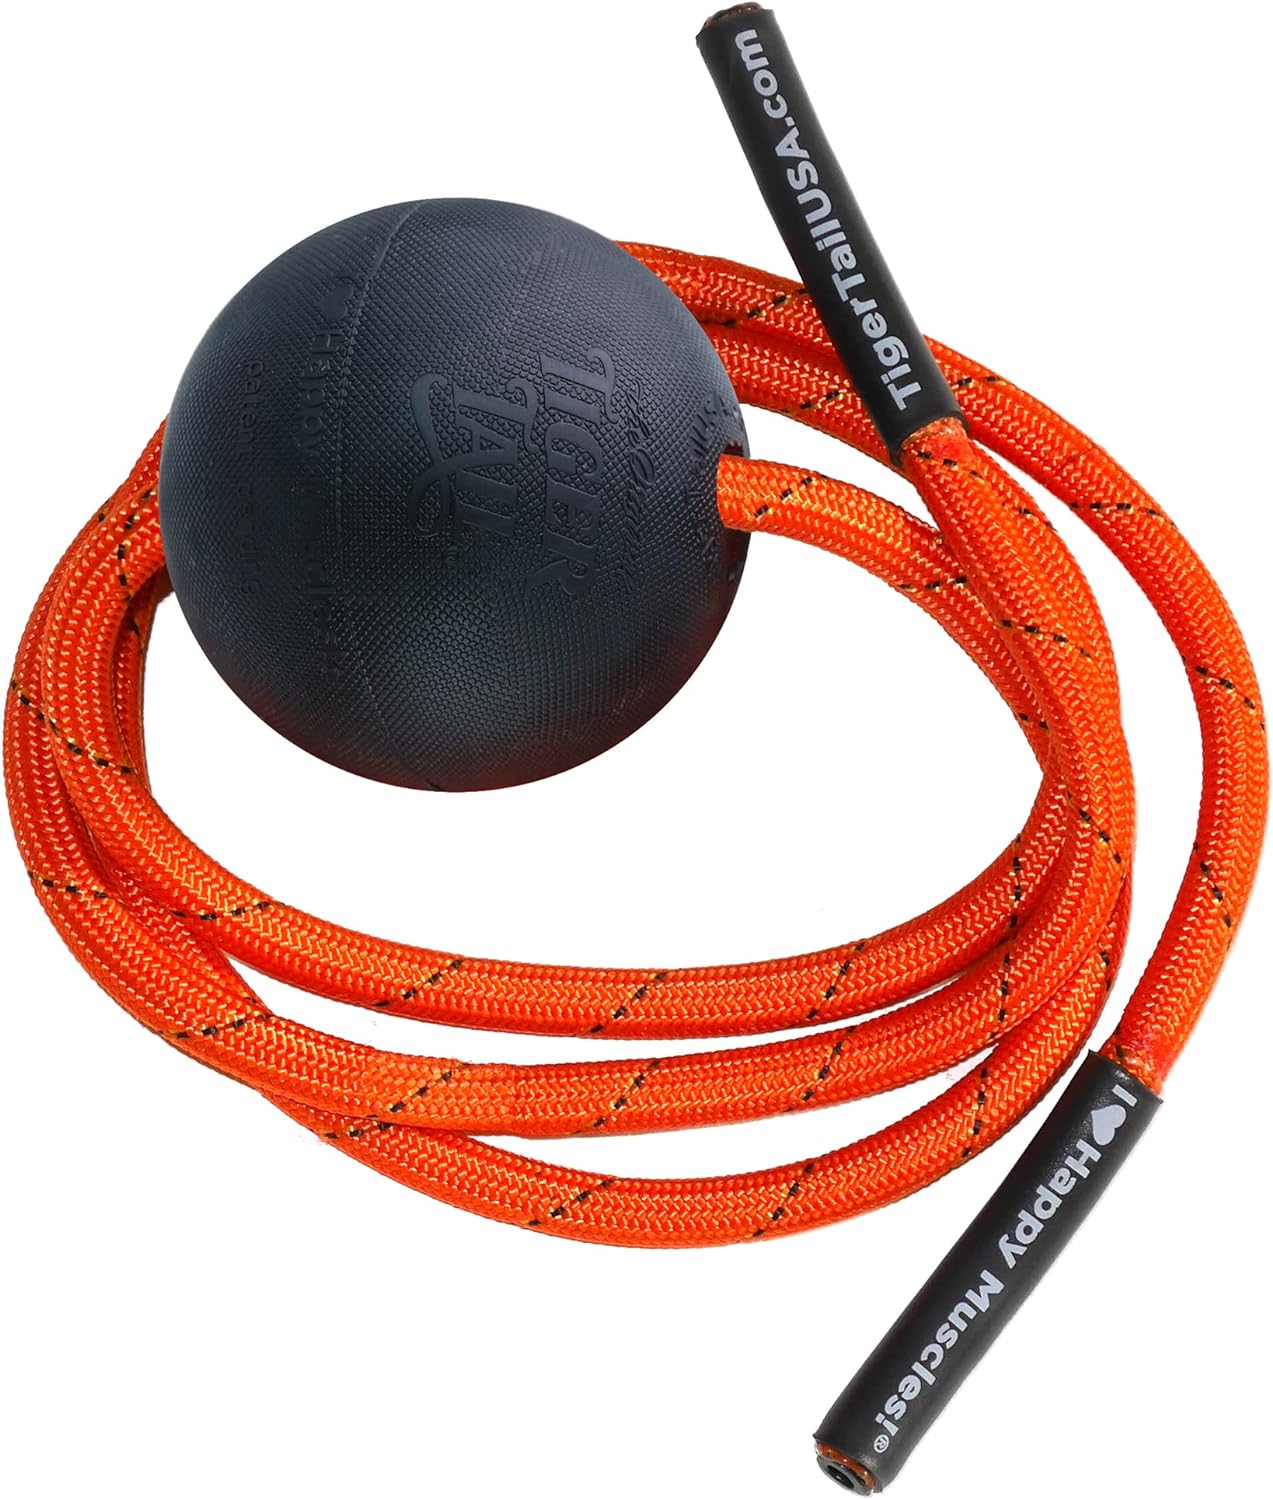 tiger tail tiger ball, one of the best neck massagers